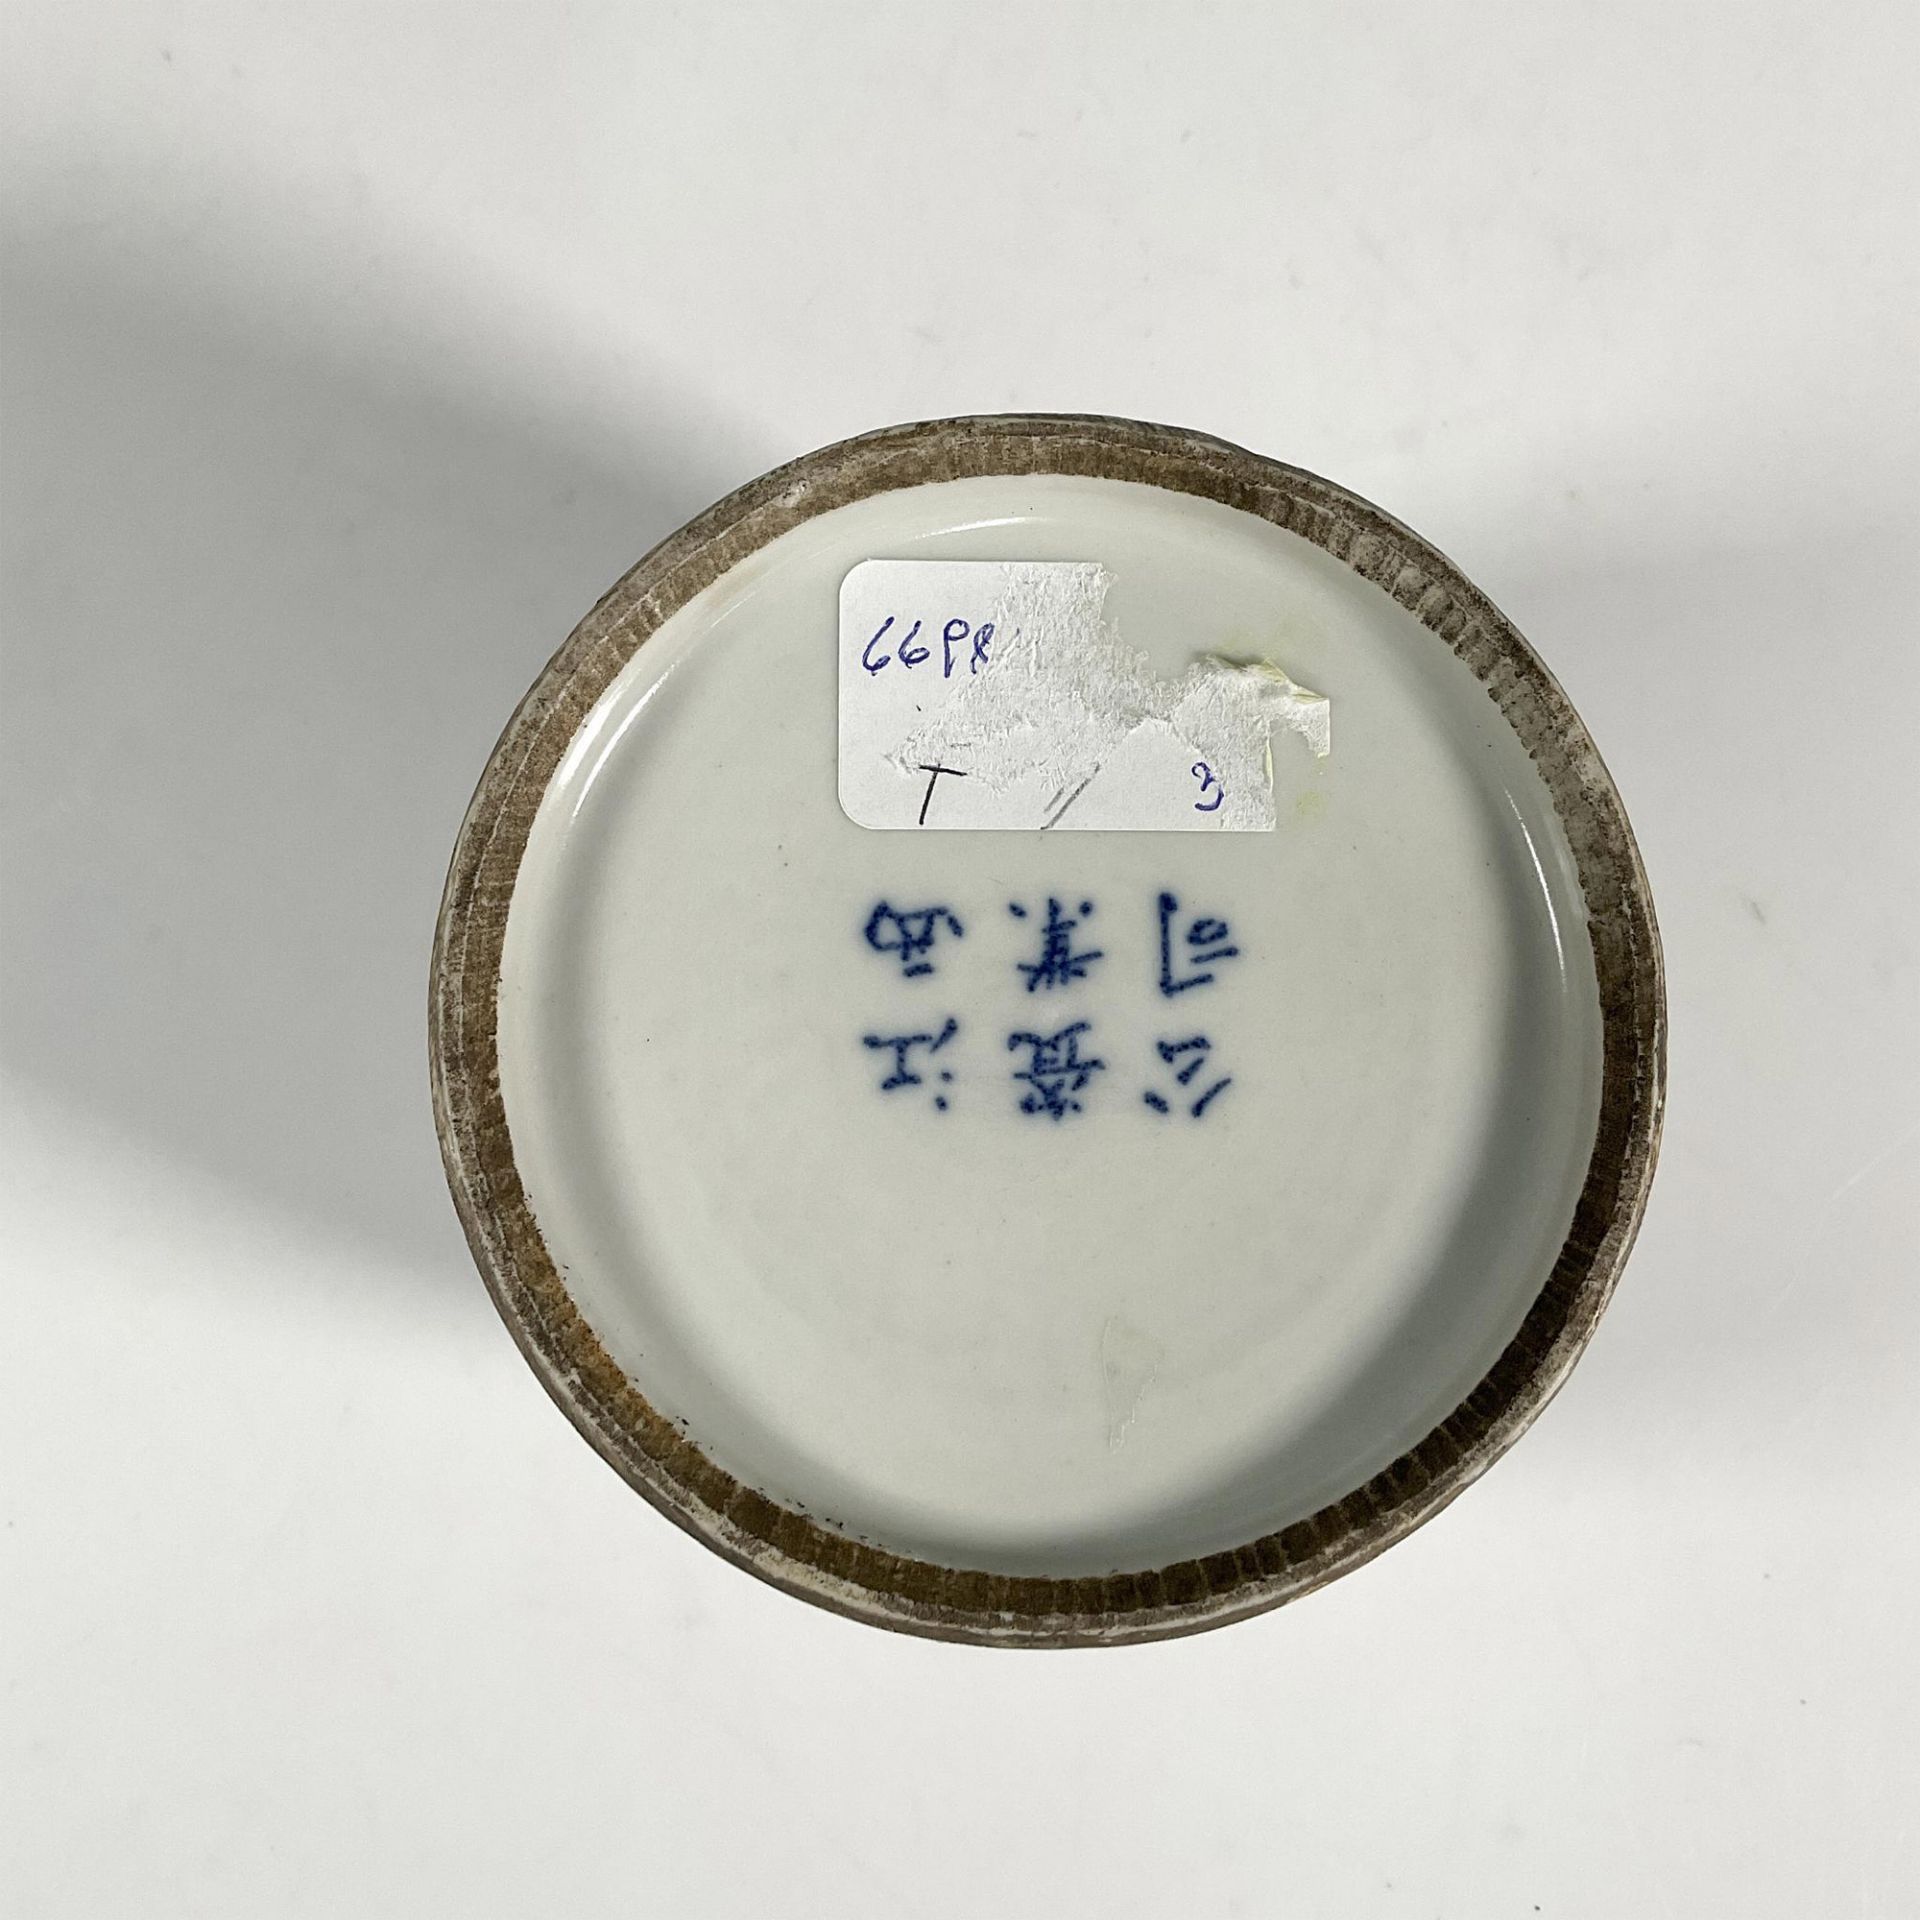 Chinese Porcelain Waterdropper or Inkwell Jingdezhen Marks - Image 3 of 3